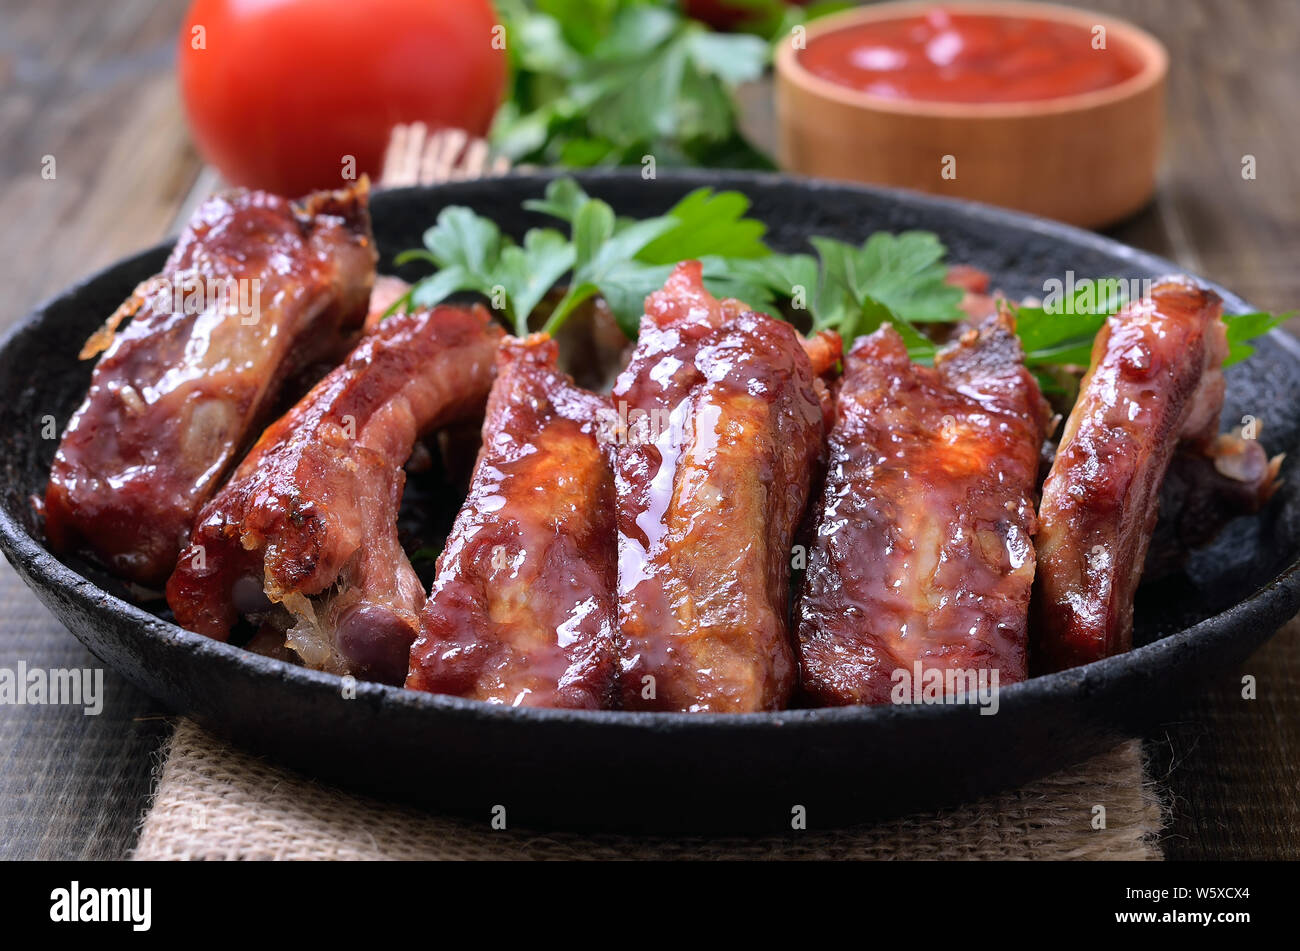 Grilled pork ribs in frying pan, close up view Stock Photo